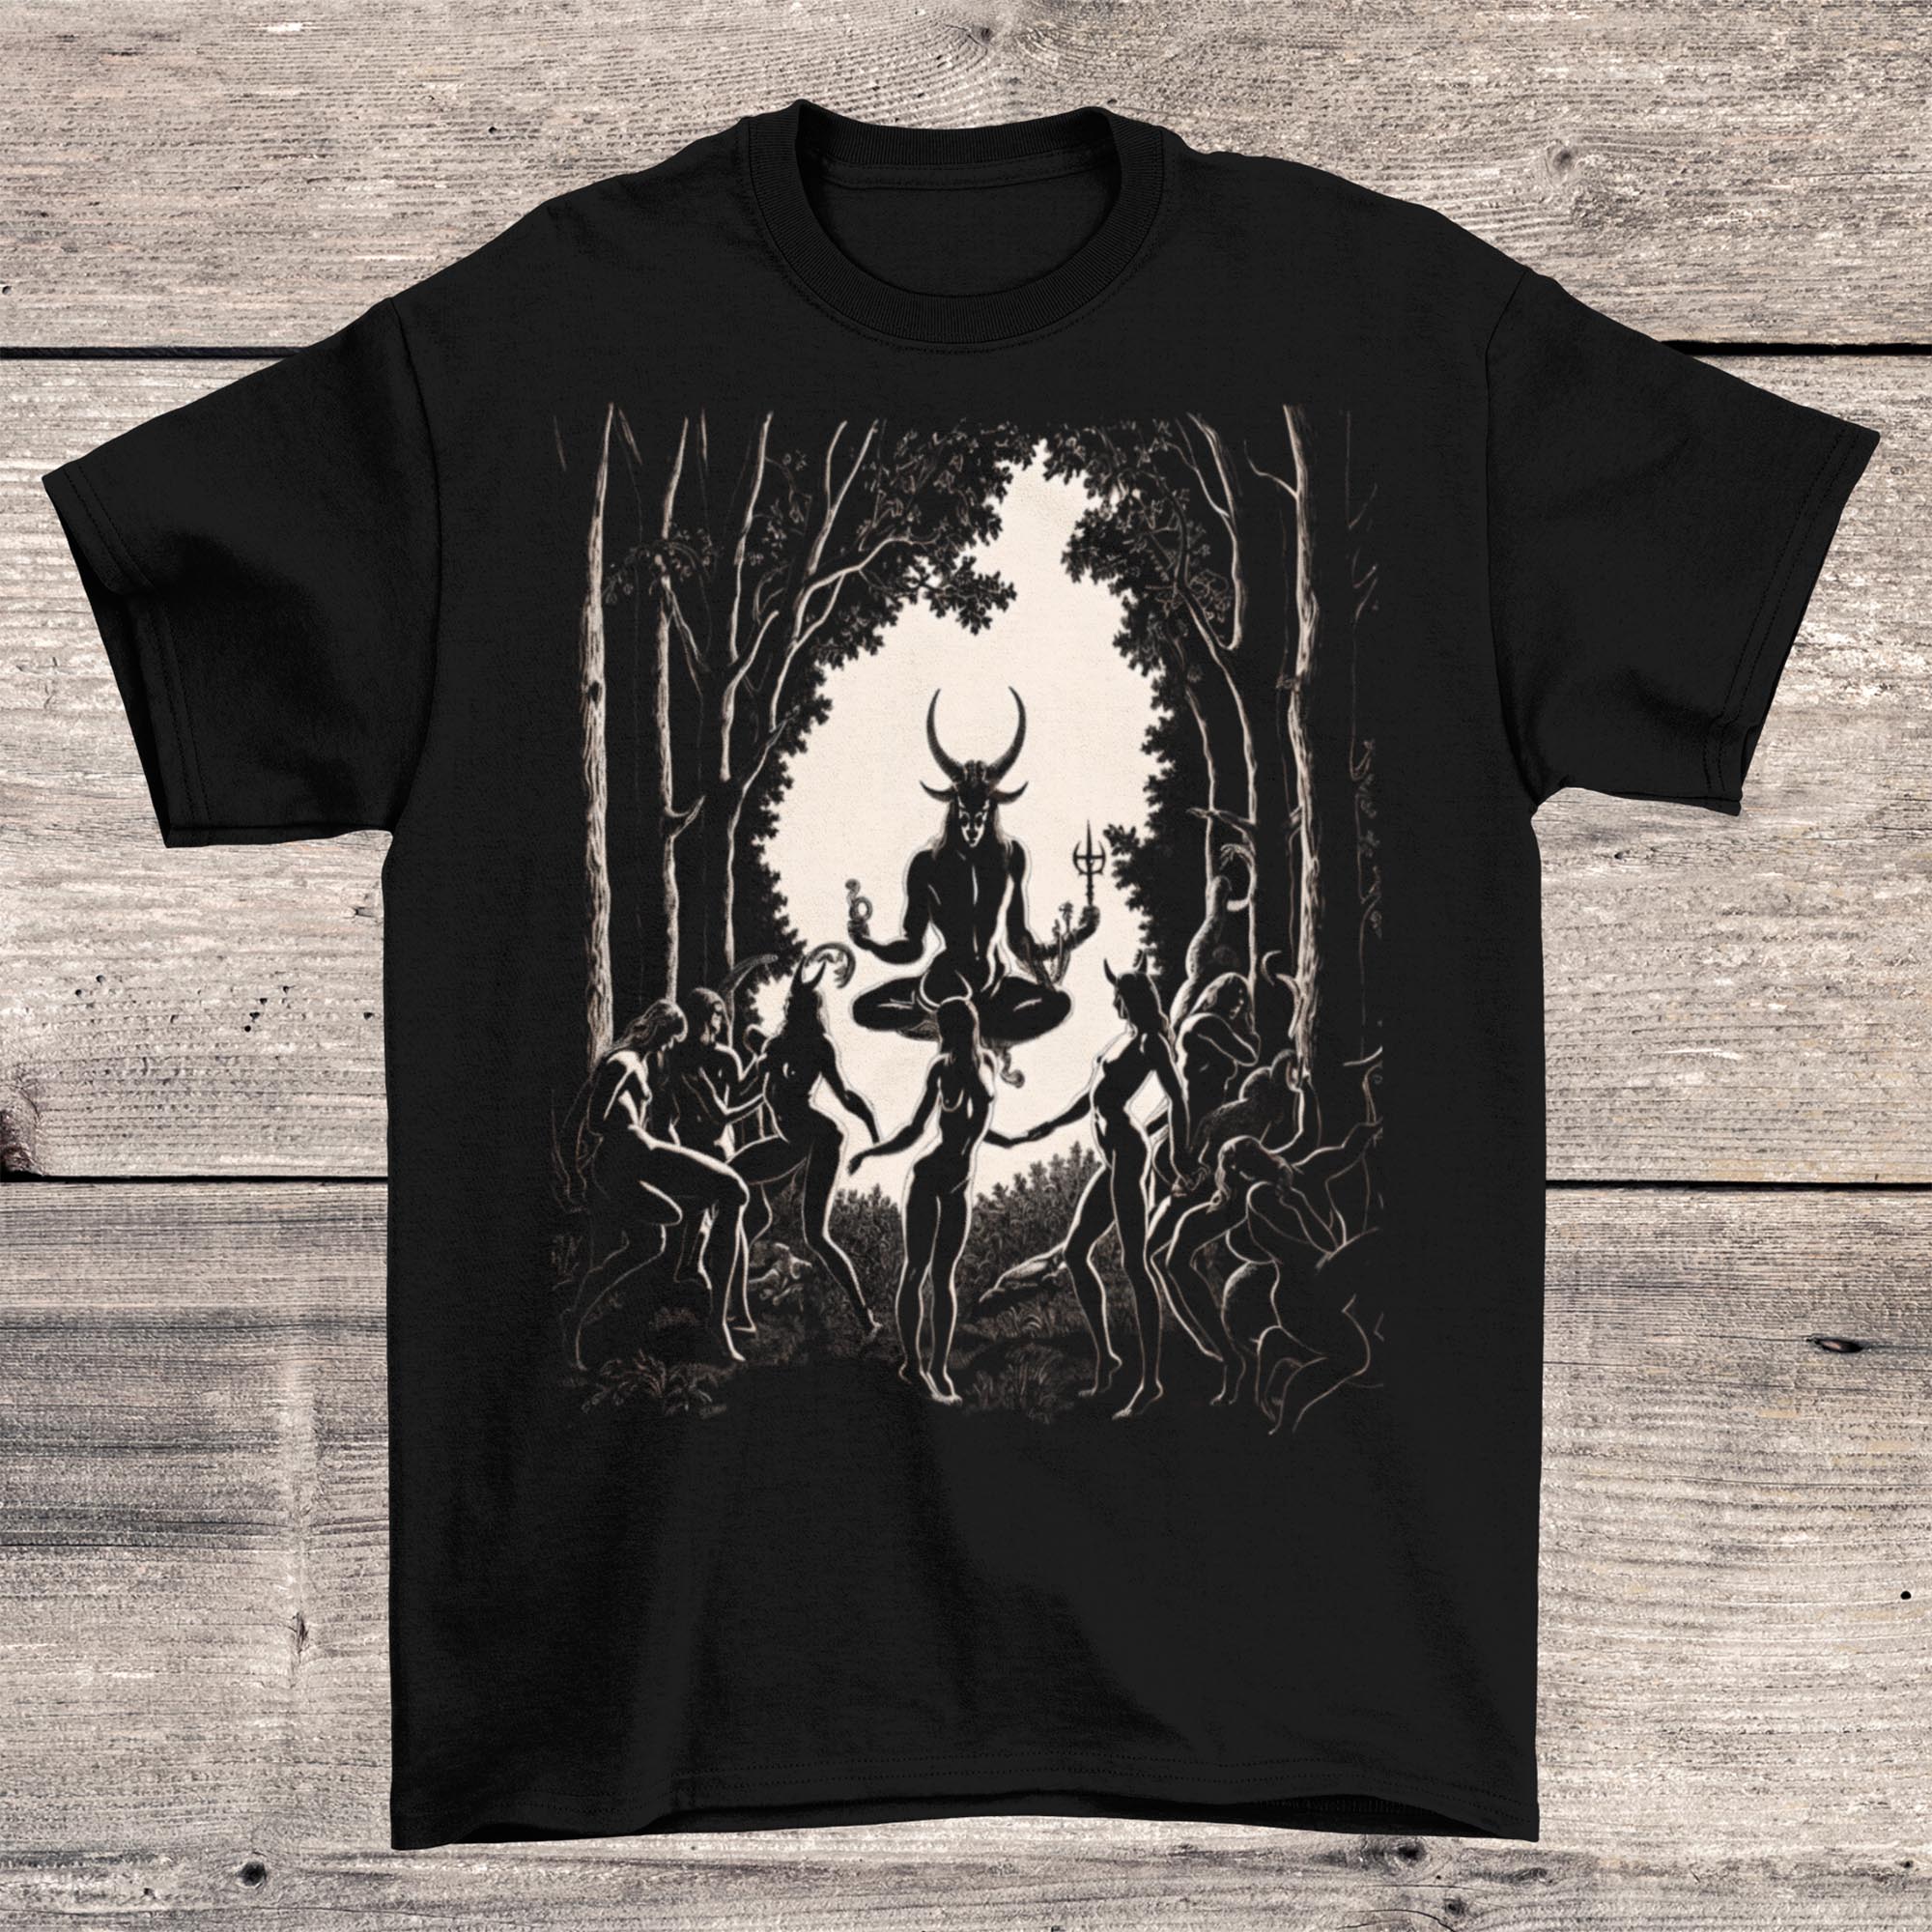 T-Shirts XS / Solid Black Blend Pan T-Shirt, Satyr of Sacred Sexuality | Heathen, Nature Spirit | Pagan Wiccan Occult Witches | Dark Witchy Ritual Graphic Art T-Shirt